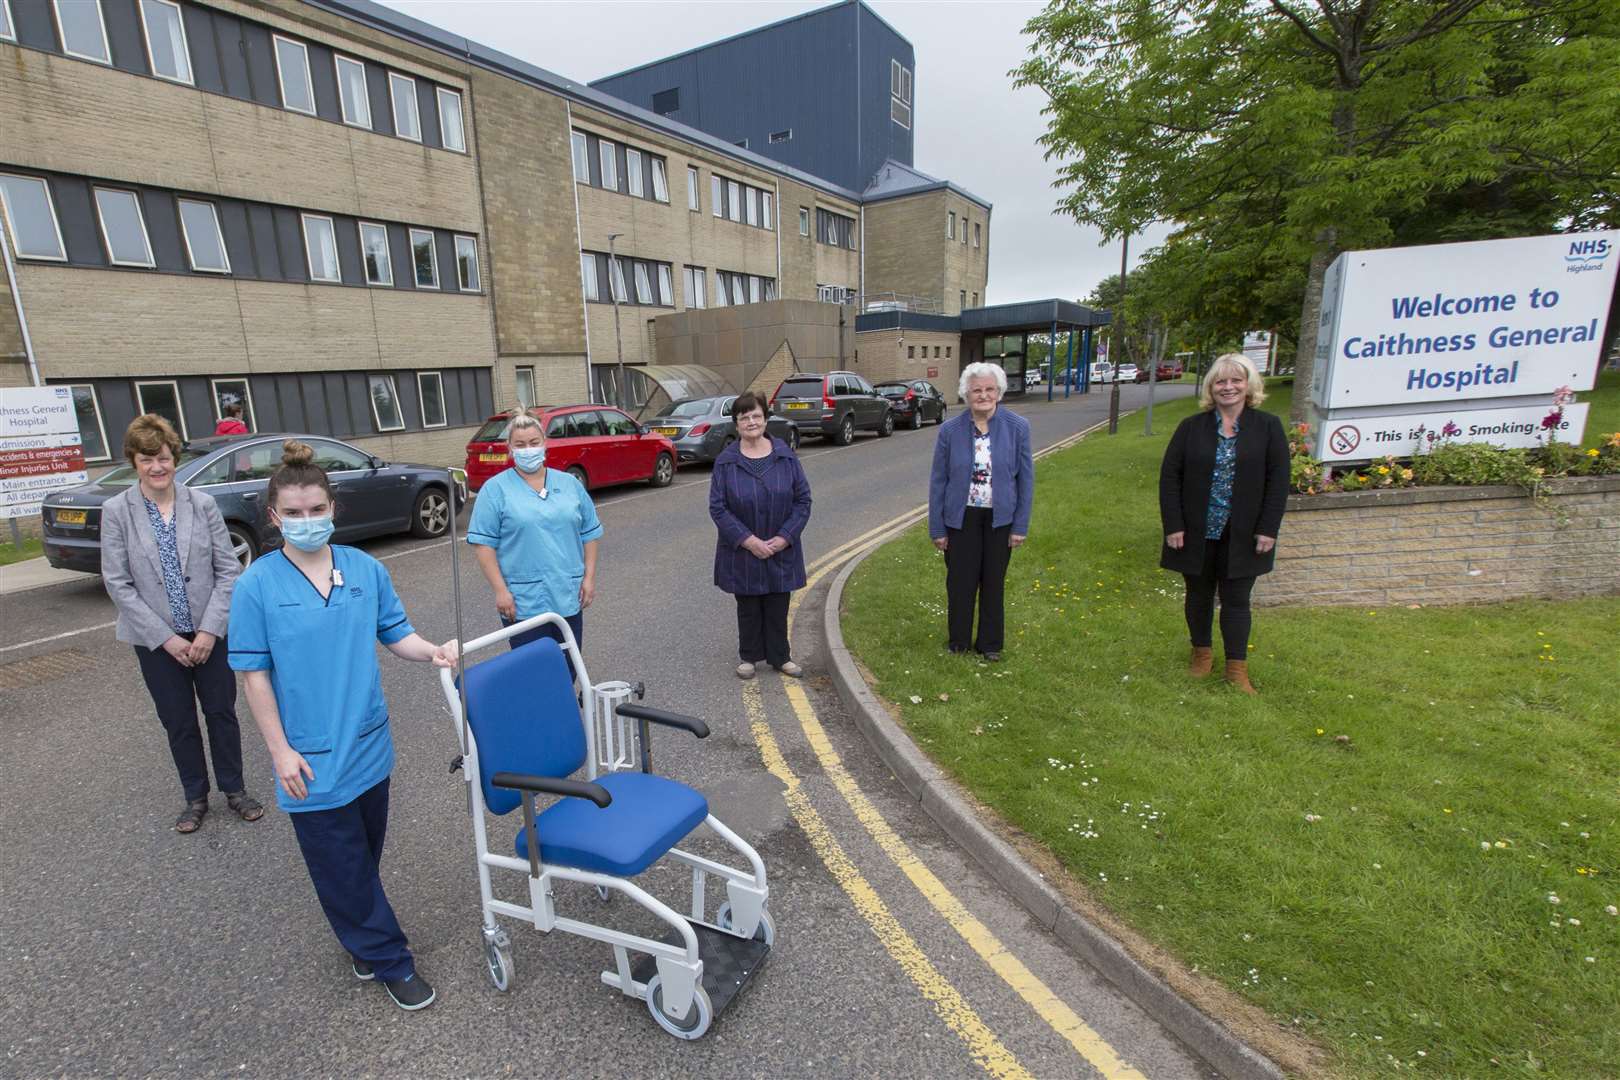 Radiographer Eilidh Sinclair (foreground) and assistant practitioner Kayleigh Brock with the specially adapted wheelchair, while looking on are some members of the League of Friends – (from left) committee member Barbara Nicol, treasurer Lorette Mackay, secretary Lottie Shearer and committee member Marjory Miller. Picture: Robert MacDonald / Northern Studios